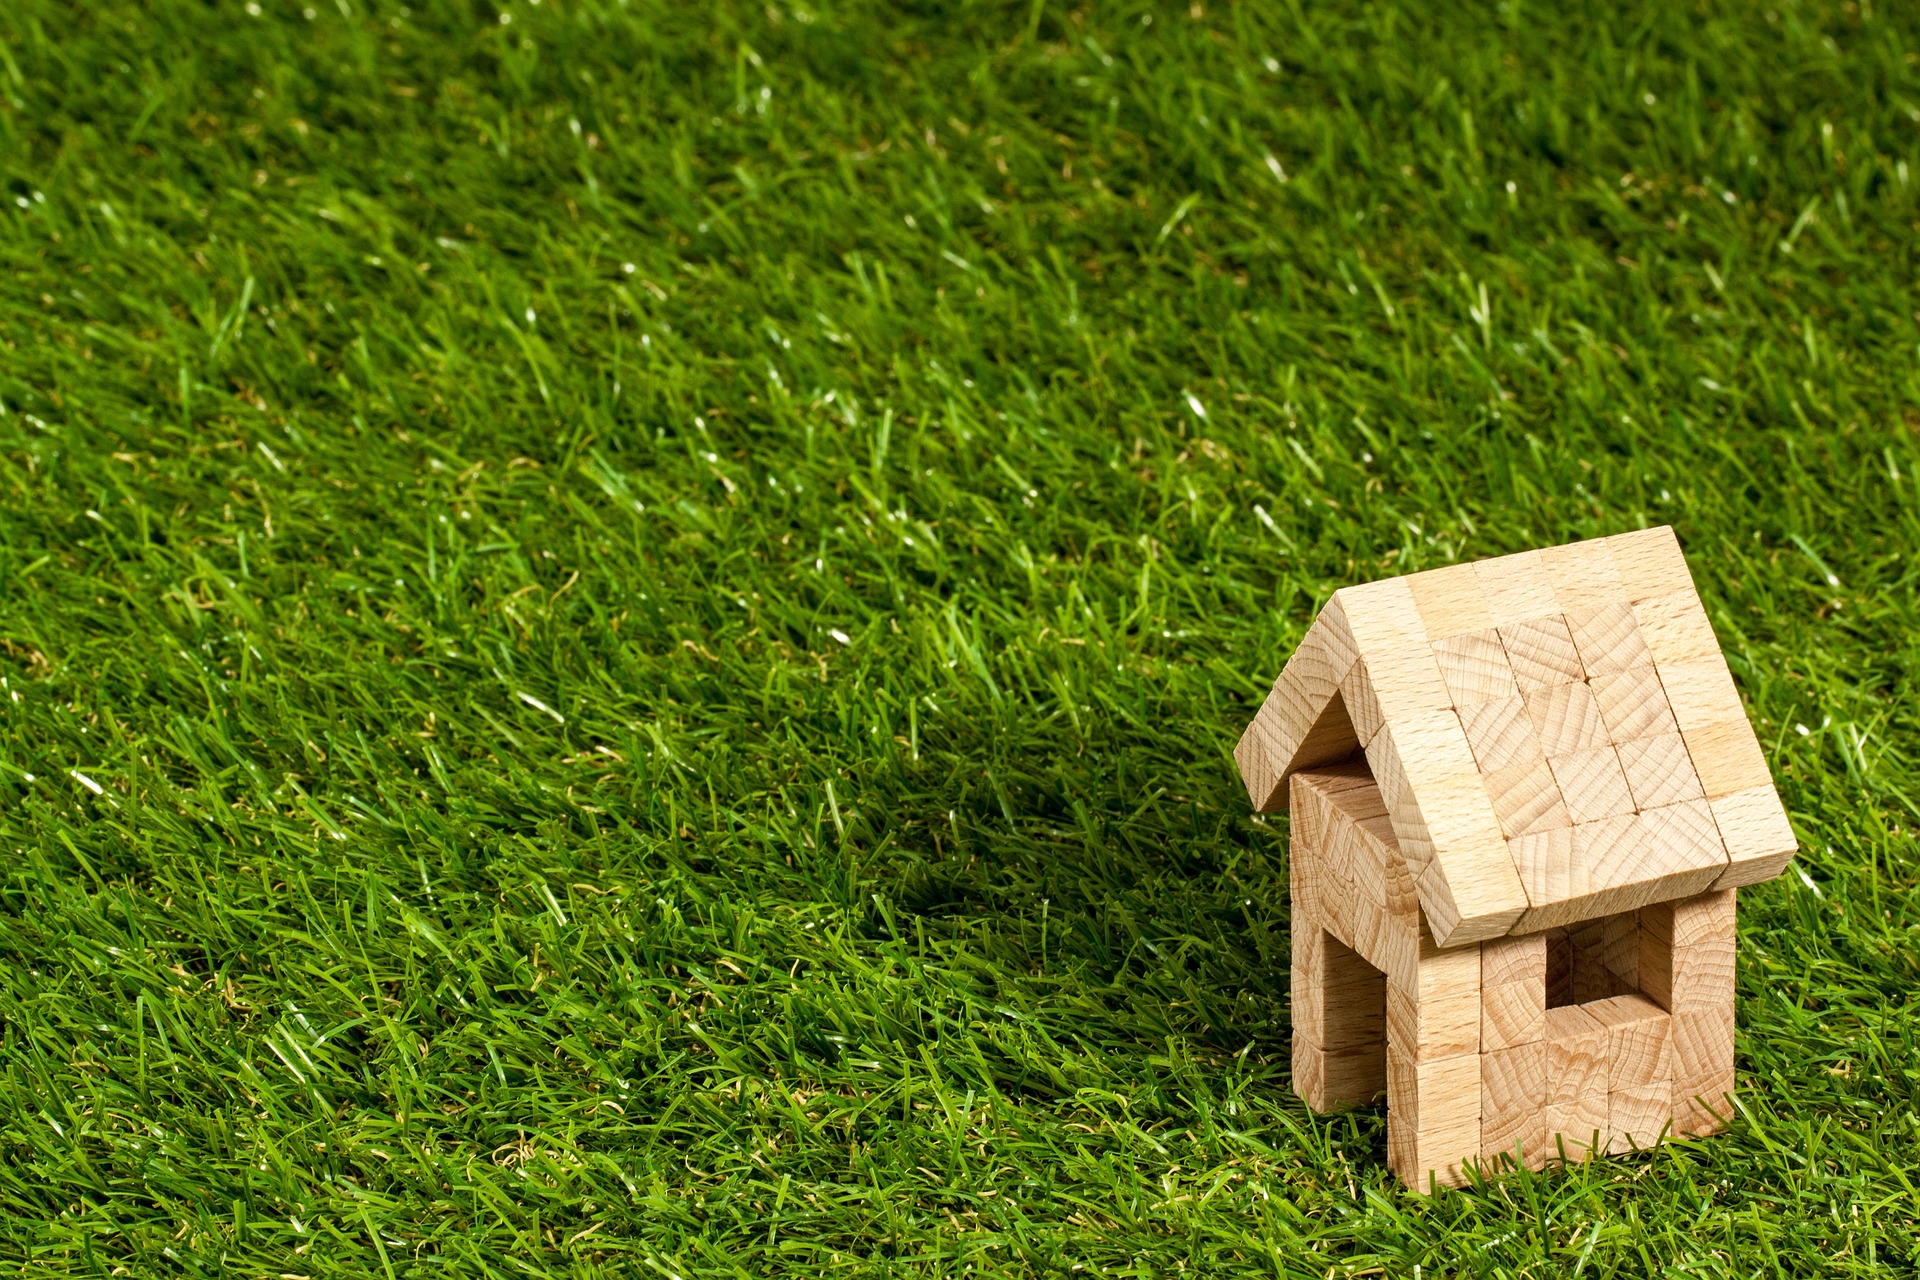 A green field, with a little wooden house, made of blocks.  Our Conveyancing Solicitors in Lytham discuss mortgages, and what you need to get your mortgage started for your property purchase.